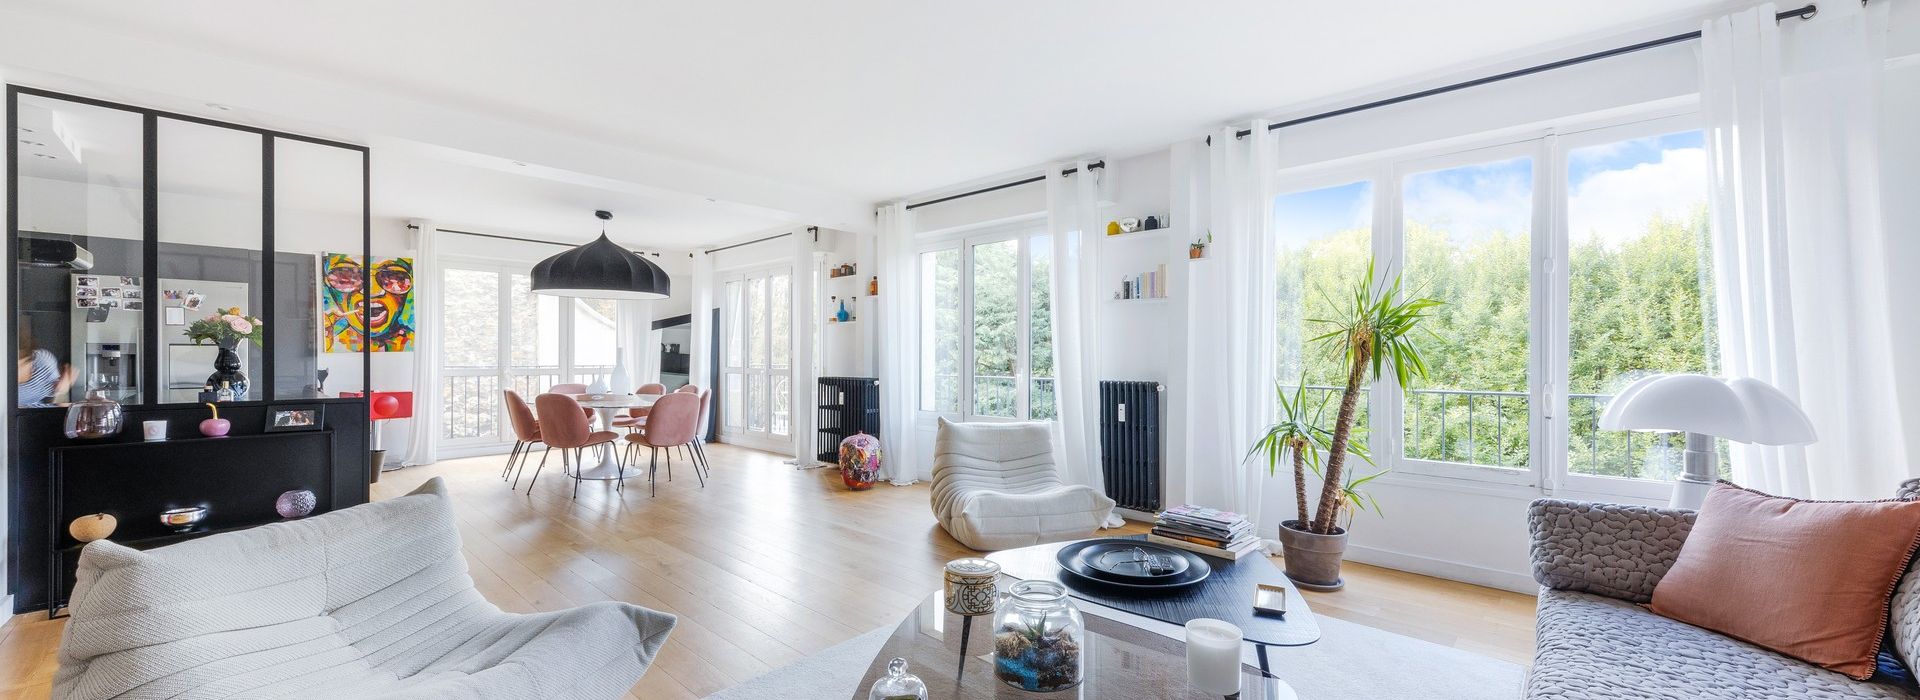 Home staging paris neuilly realty luxury realestate